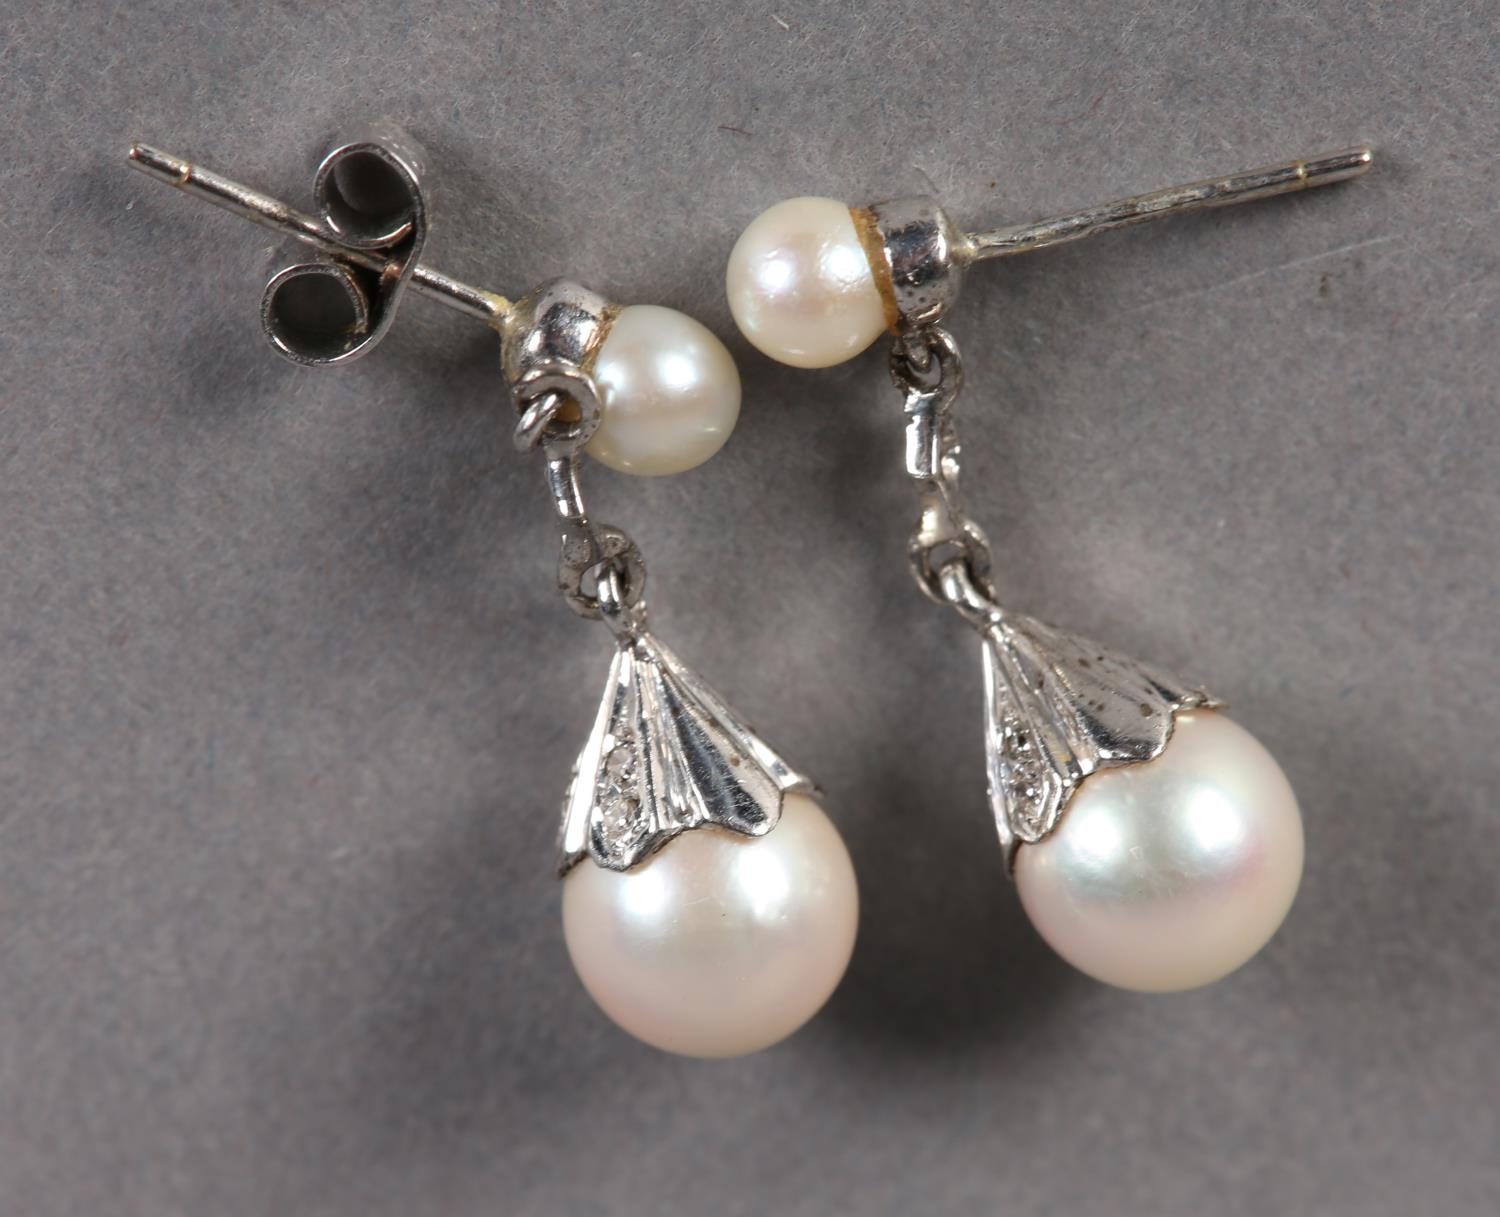 A PAIR CULTURED PEARL AND DIAMOND EARRINGS in 9ct white gold, each 7.5mm pearl in a crenulated cup - Image 2 of 2